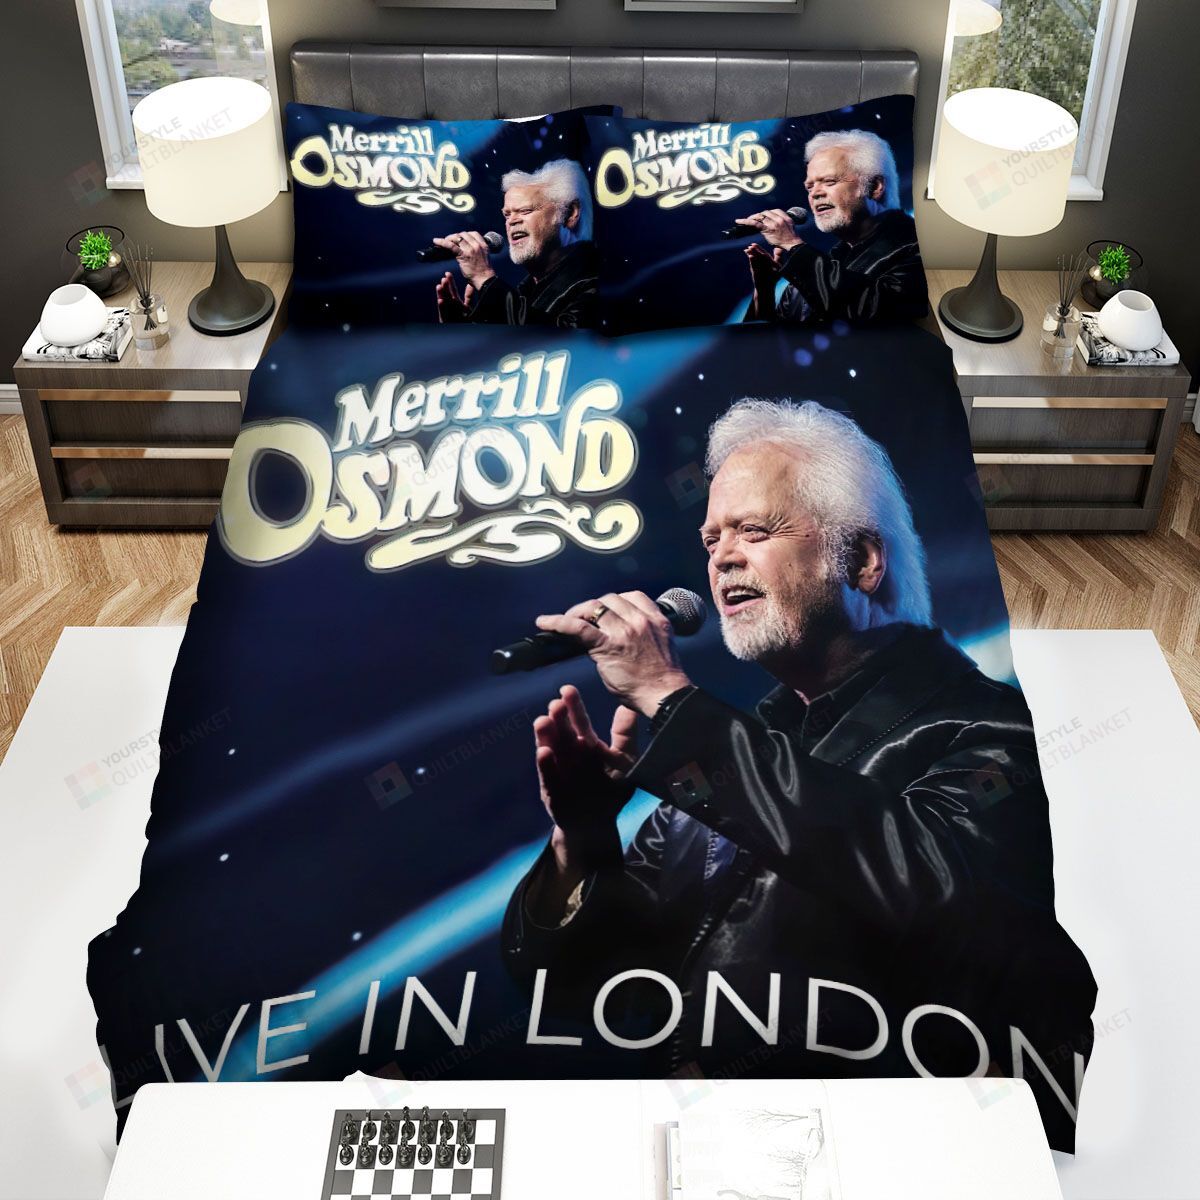 Merrill Osmond Band Live In London Bed Sheets Spread Comforter Duvet Cover Bedding Sets